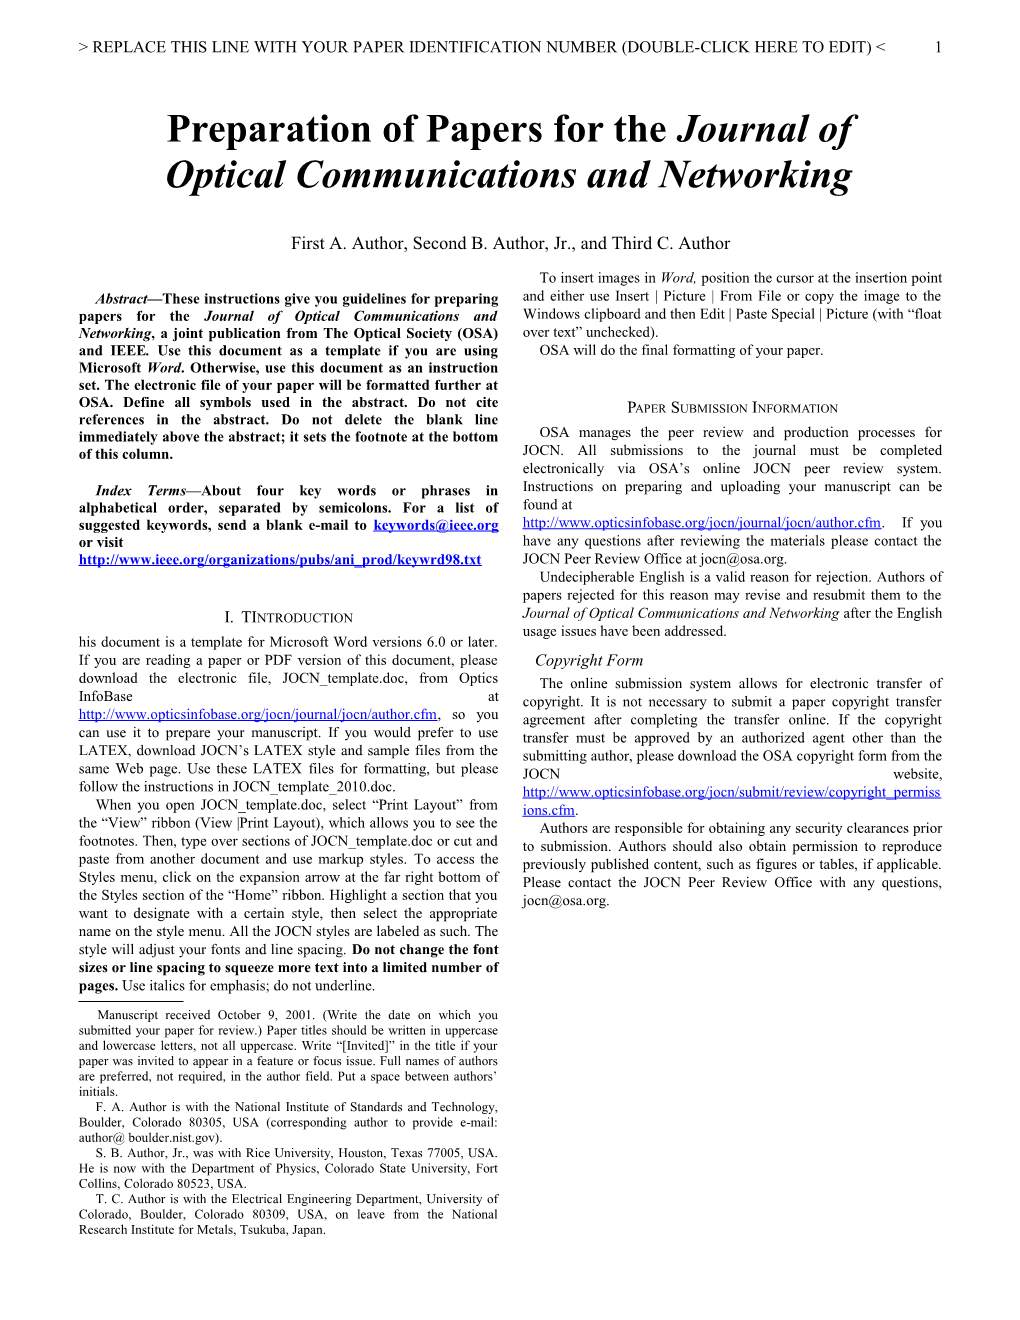 Preparation of Papers for the Journal of Optical Communications and Networking